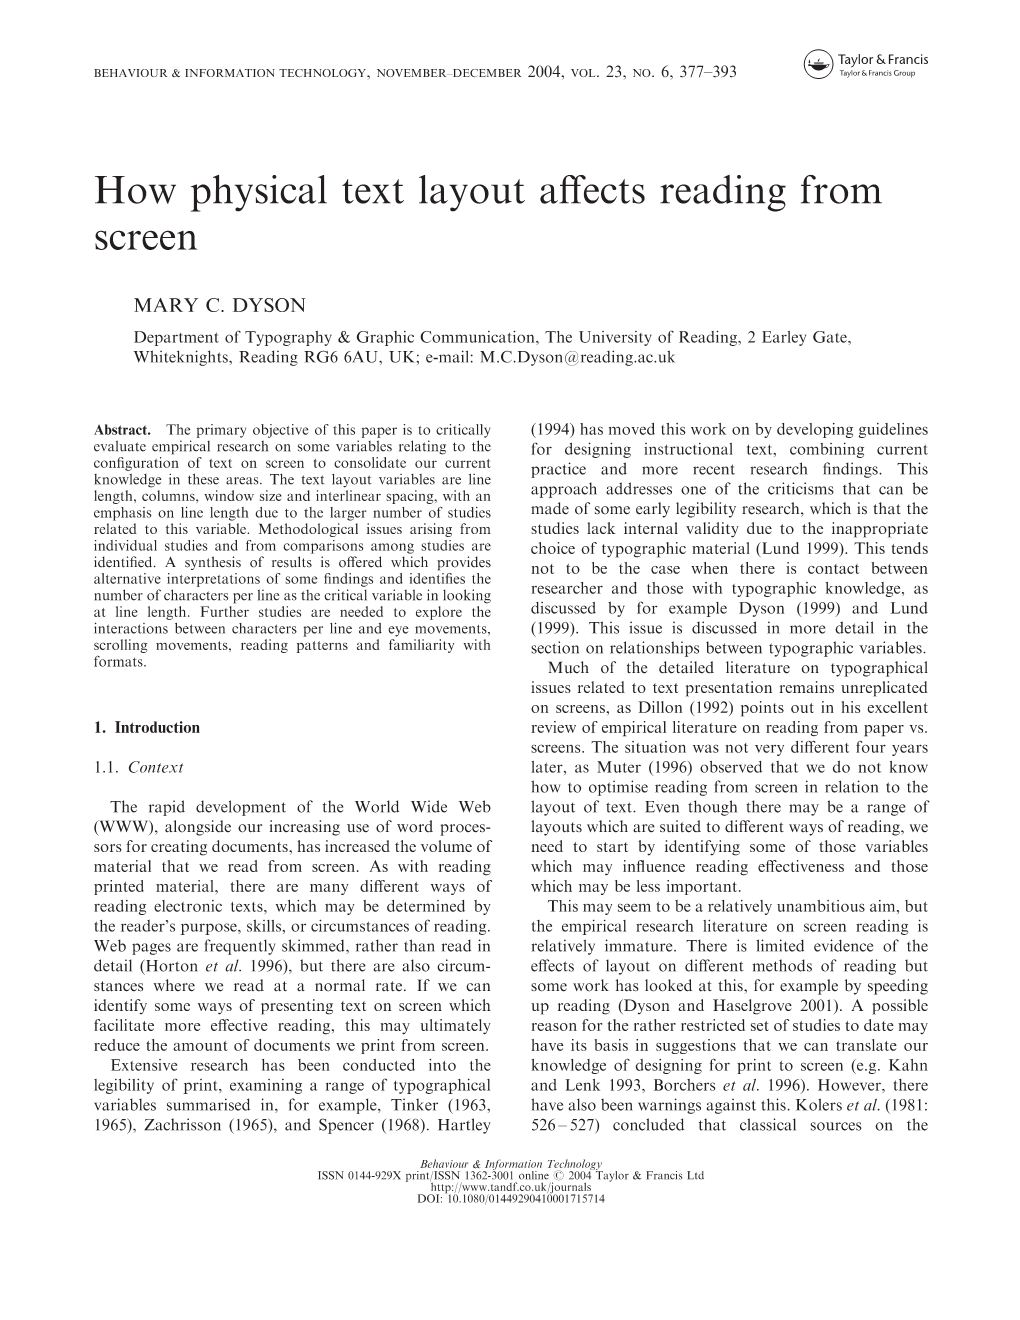 How Physical Text Layout Affects Reading from Screen